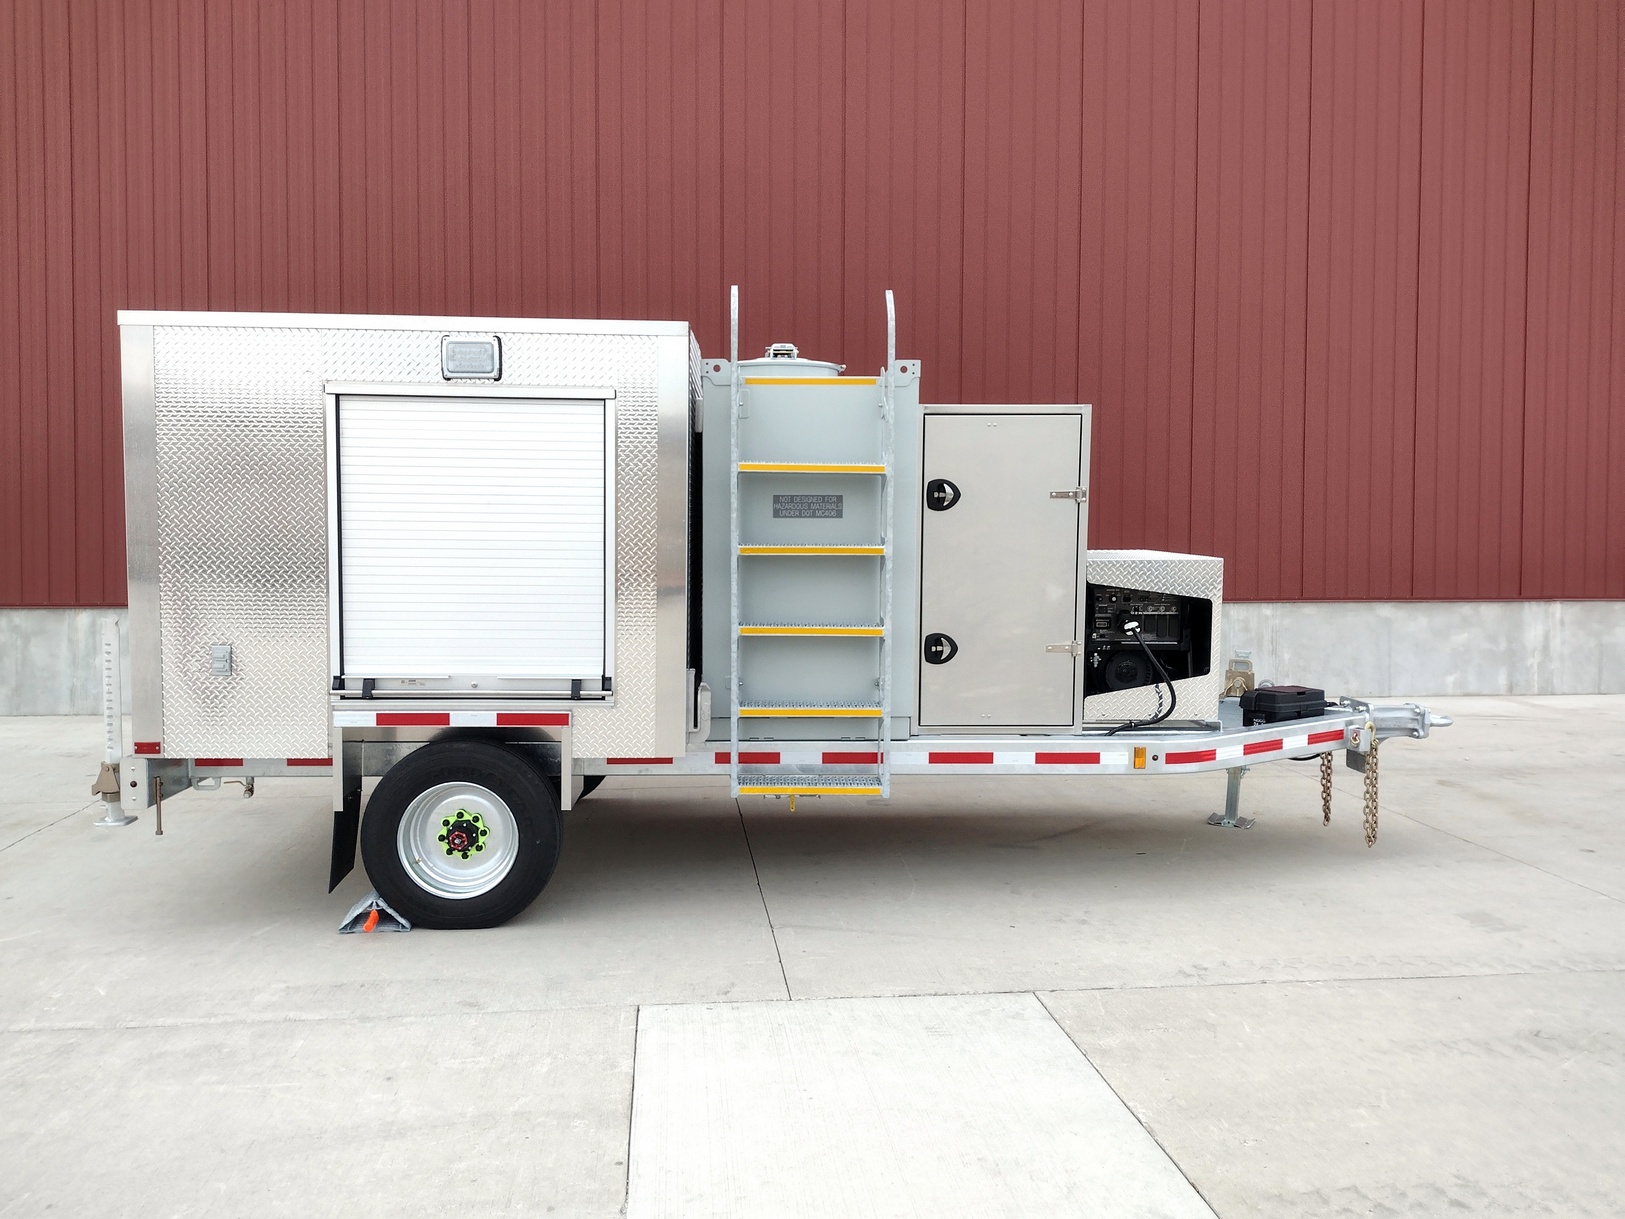 Right side view of a Sauber Model 1594 Oil Filtration Trailer with galvanized finish on concrete with red building in the background